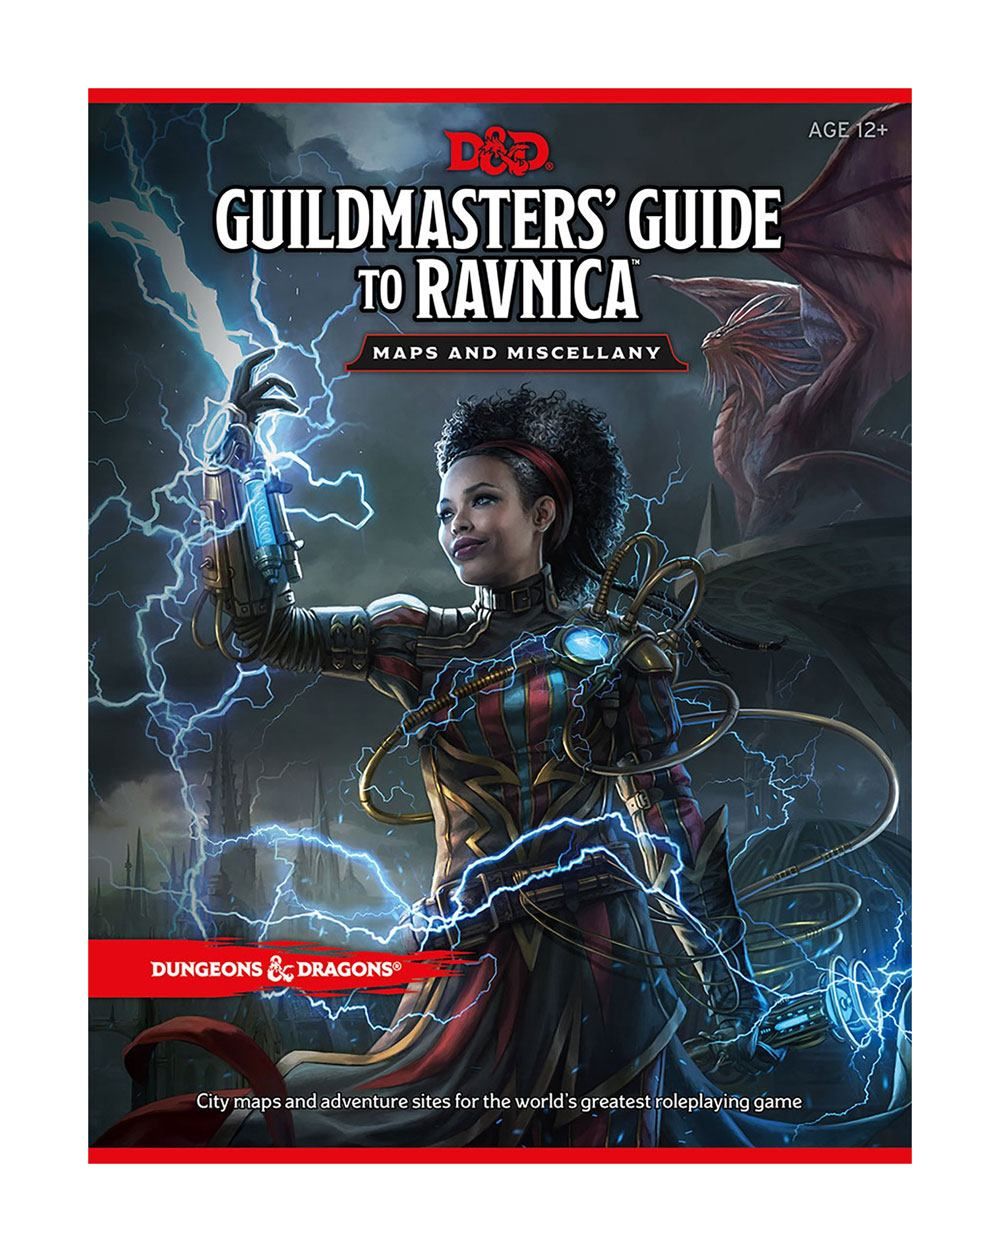 Dungeons & Dragons RPG Guildmasters' Guide to Ravnica - Maps & Miscellany english Wizards of the Coast